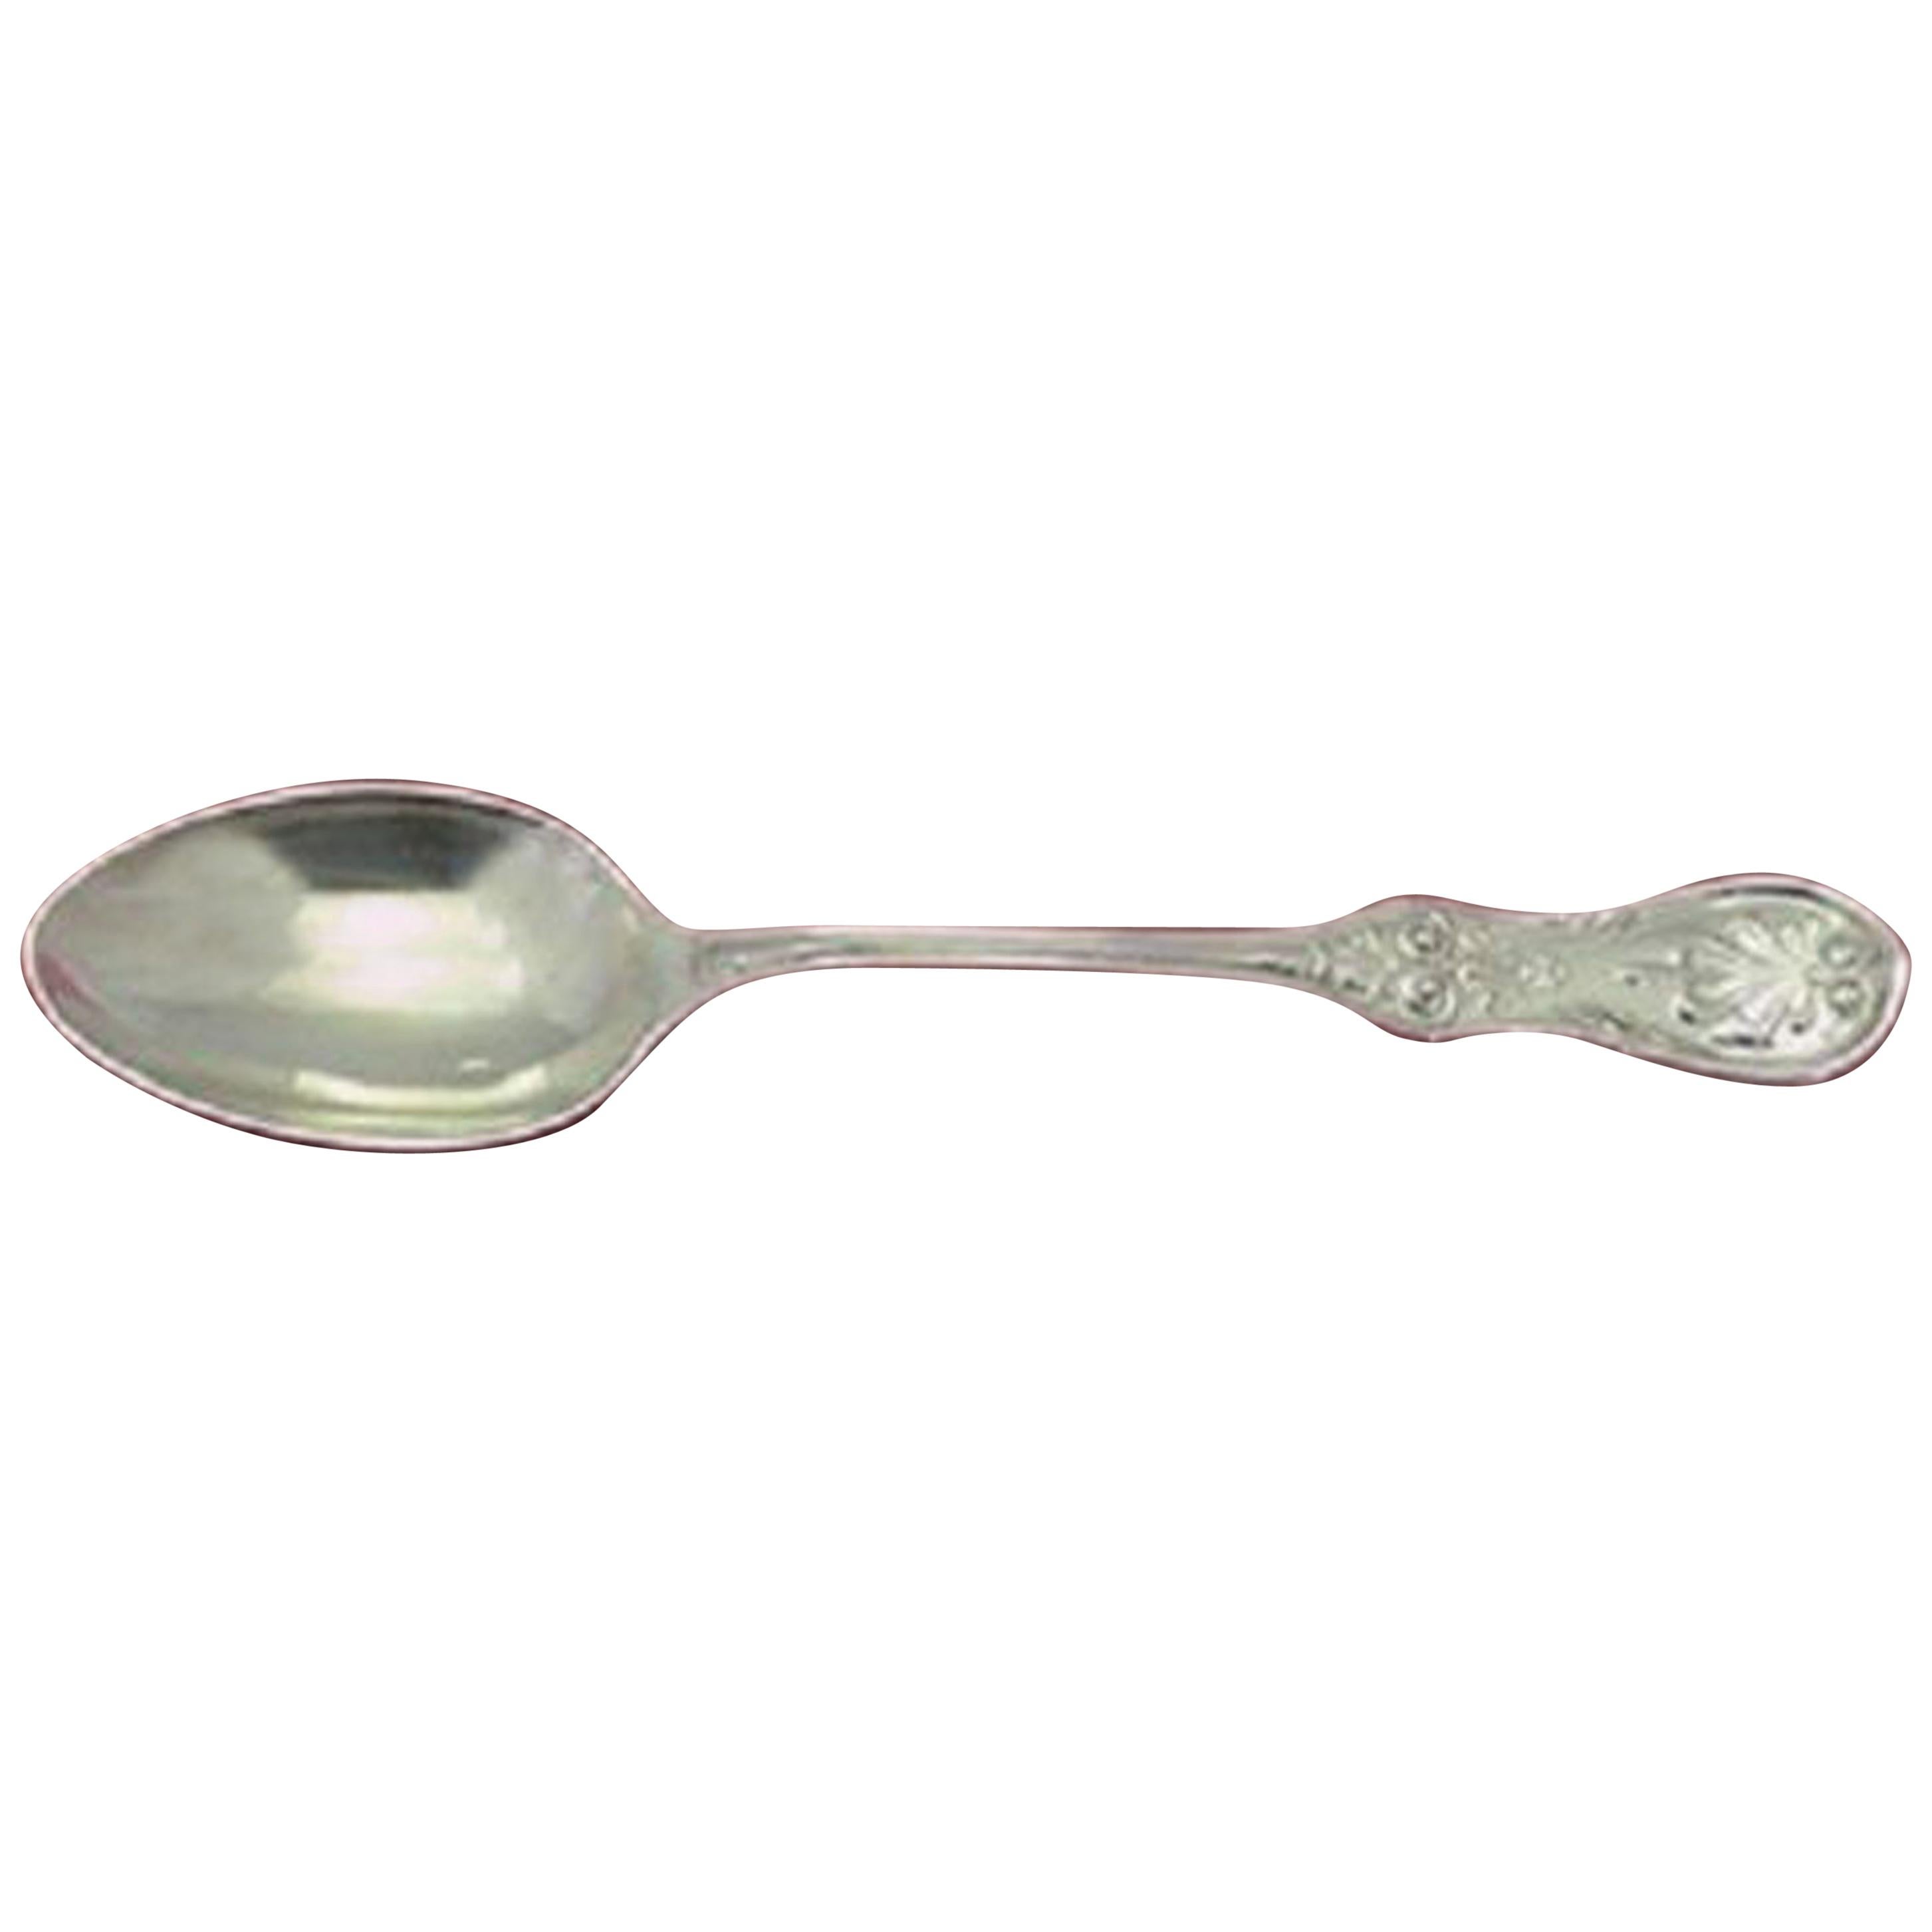 Saratoga by Tiffany and Co. Sterling Silver 4 O'Clock Spoon